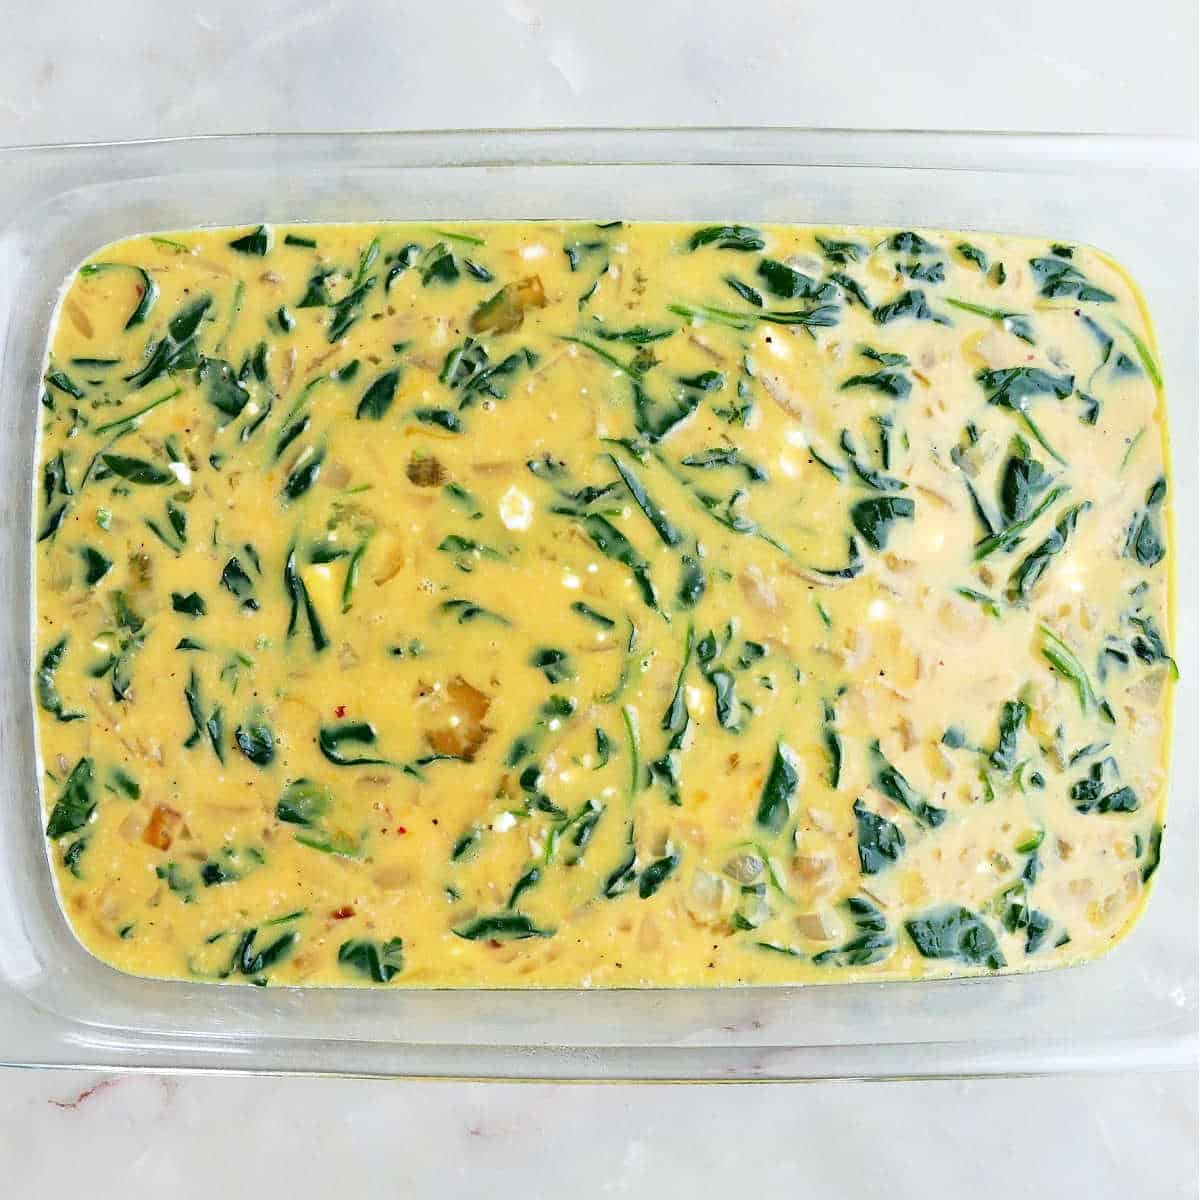 Spinach egg bake in a dish before cooking.